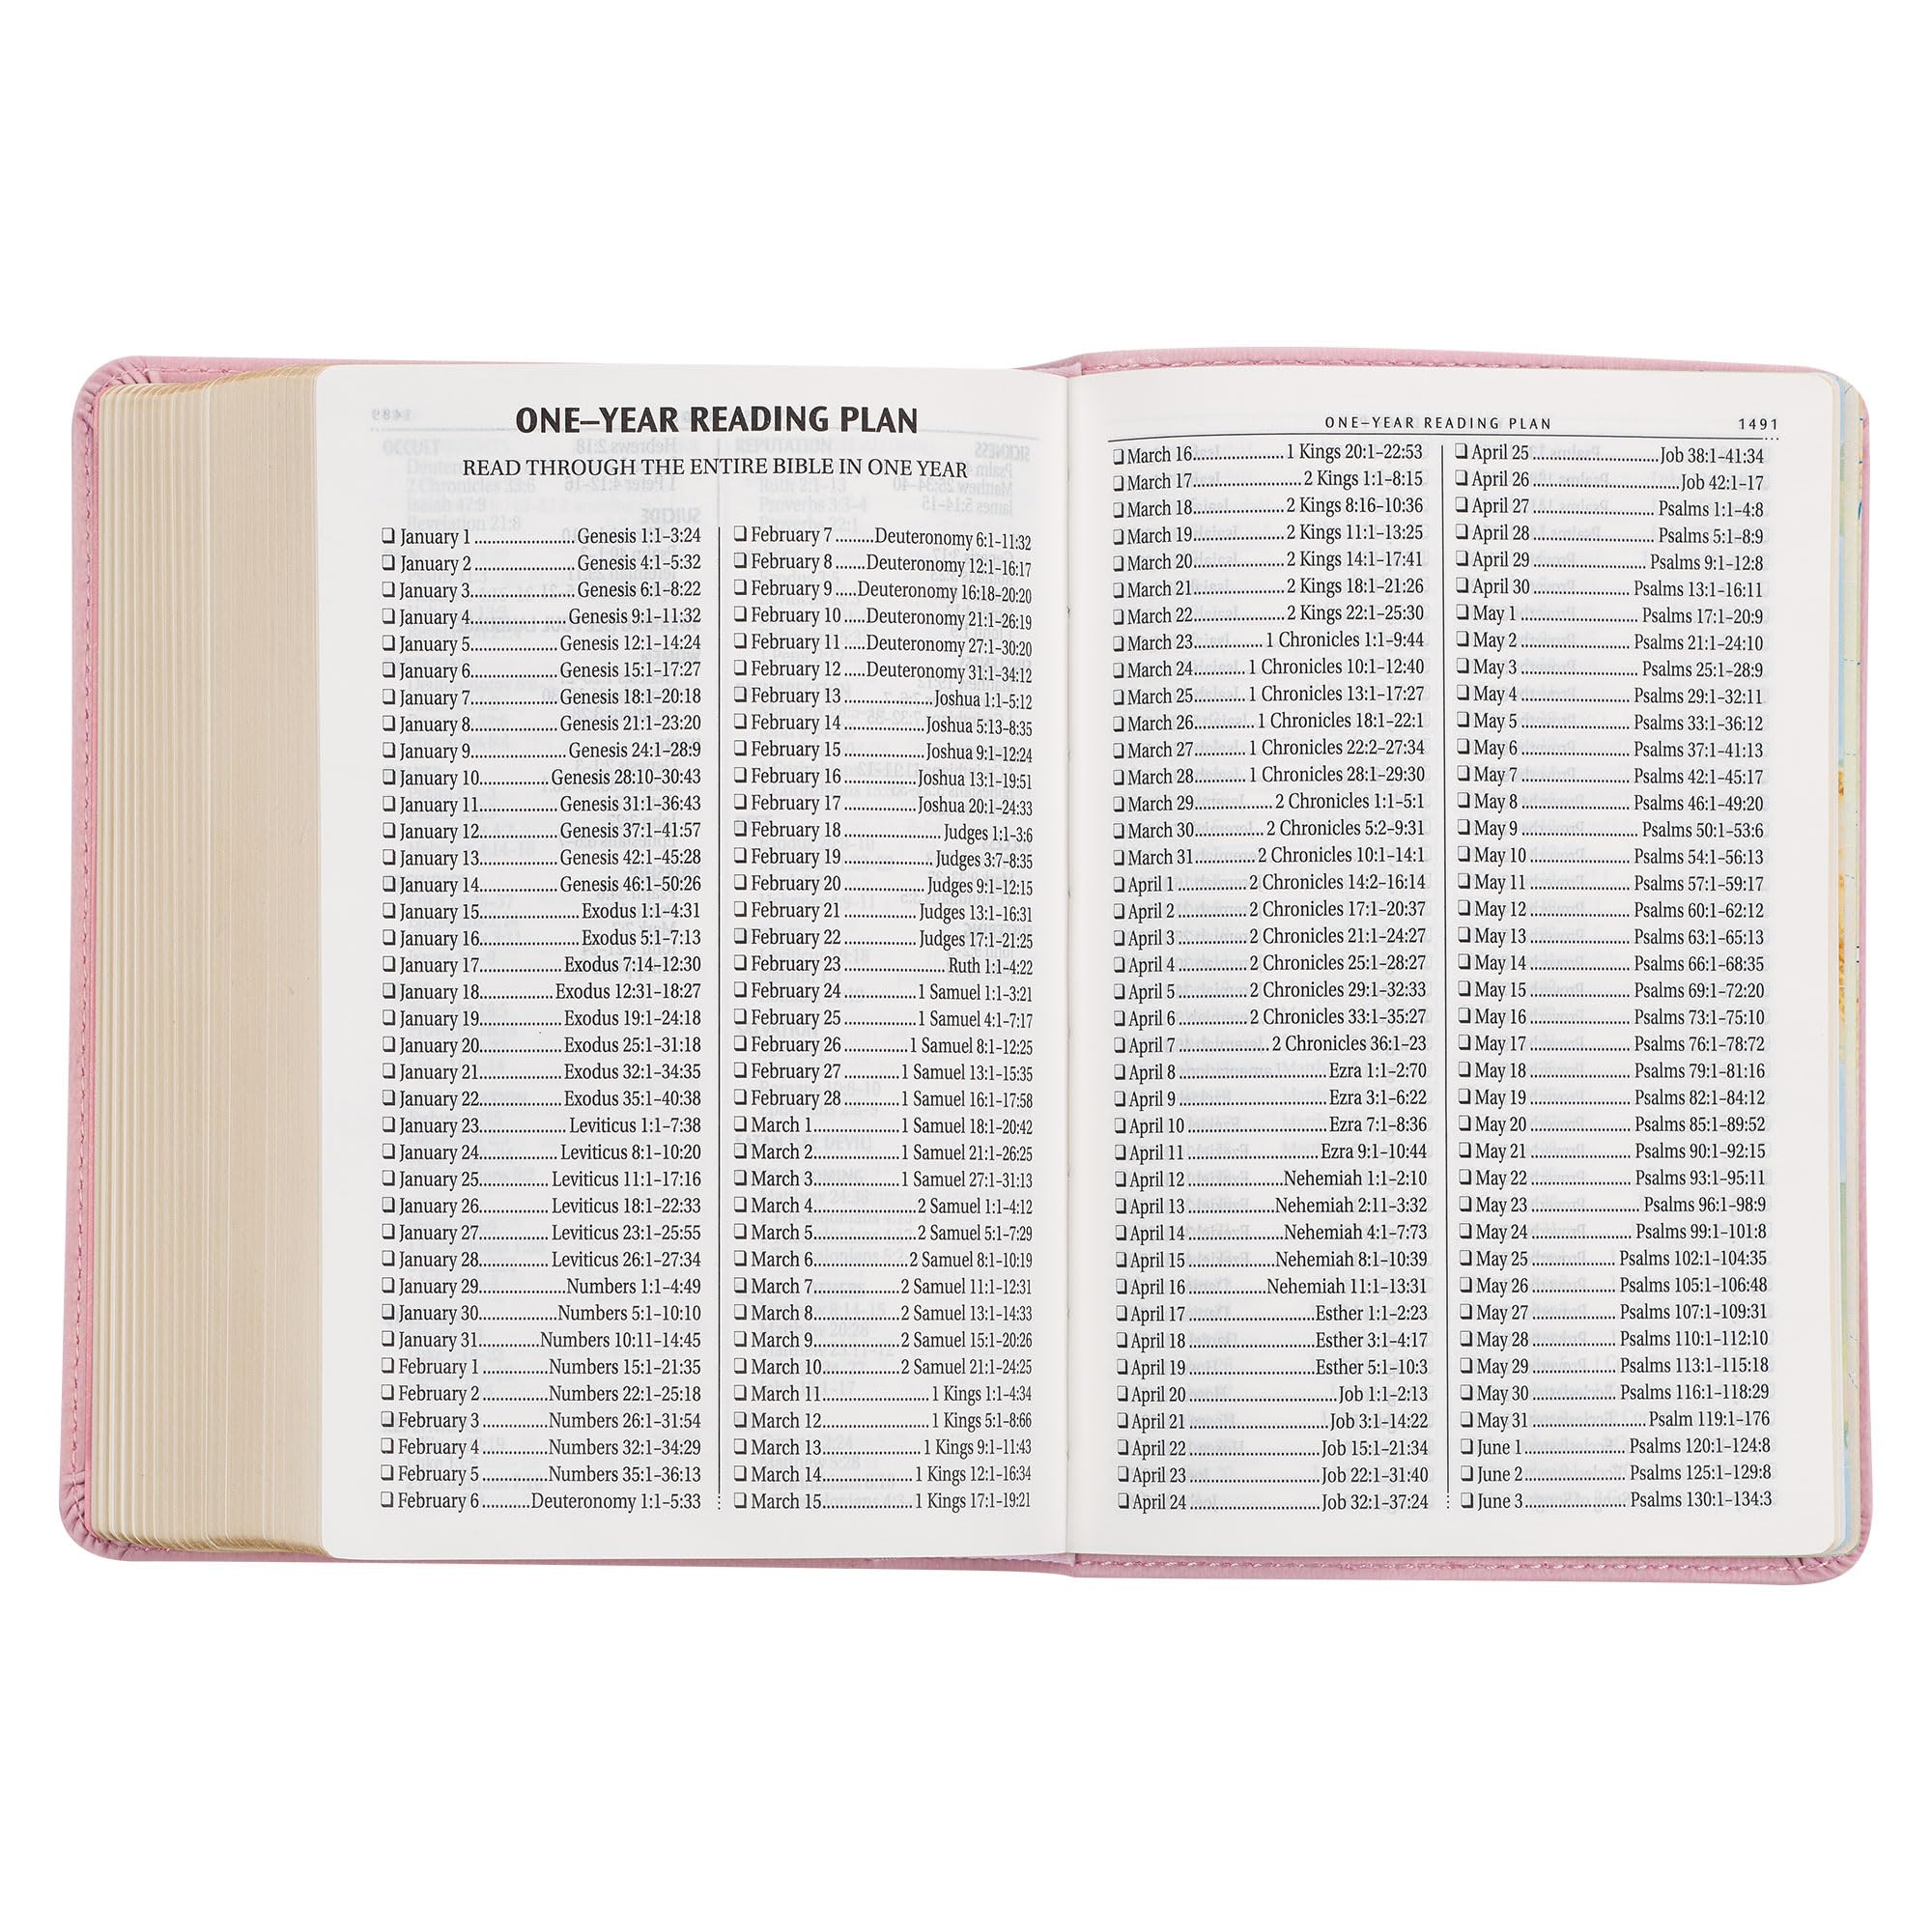 KJV Holy Bible, Compact Large Print Faux Leather Red Letter Edition - Ribbon Marker, King James Version, Pink